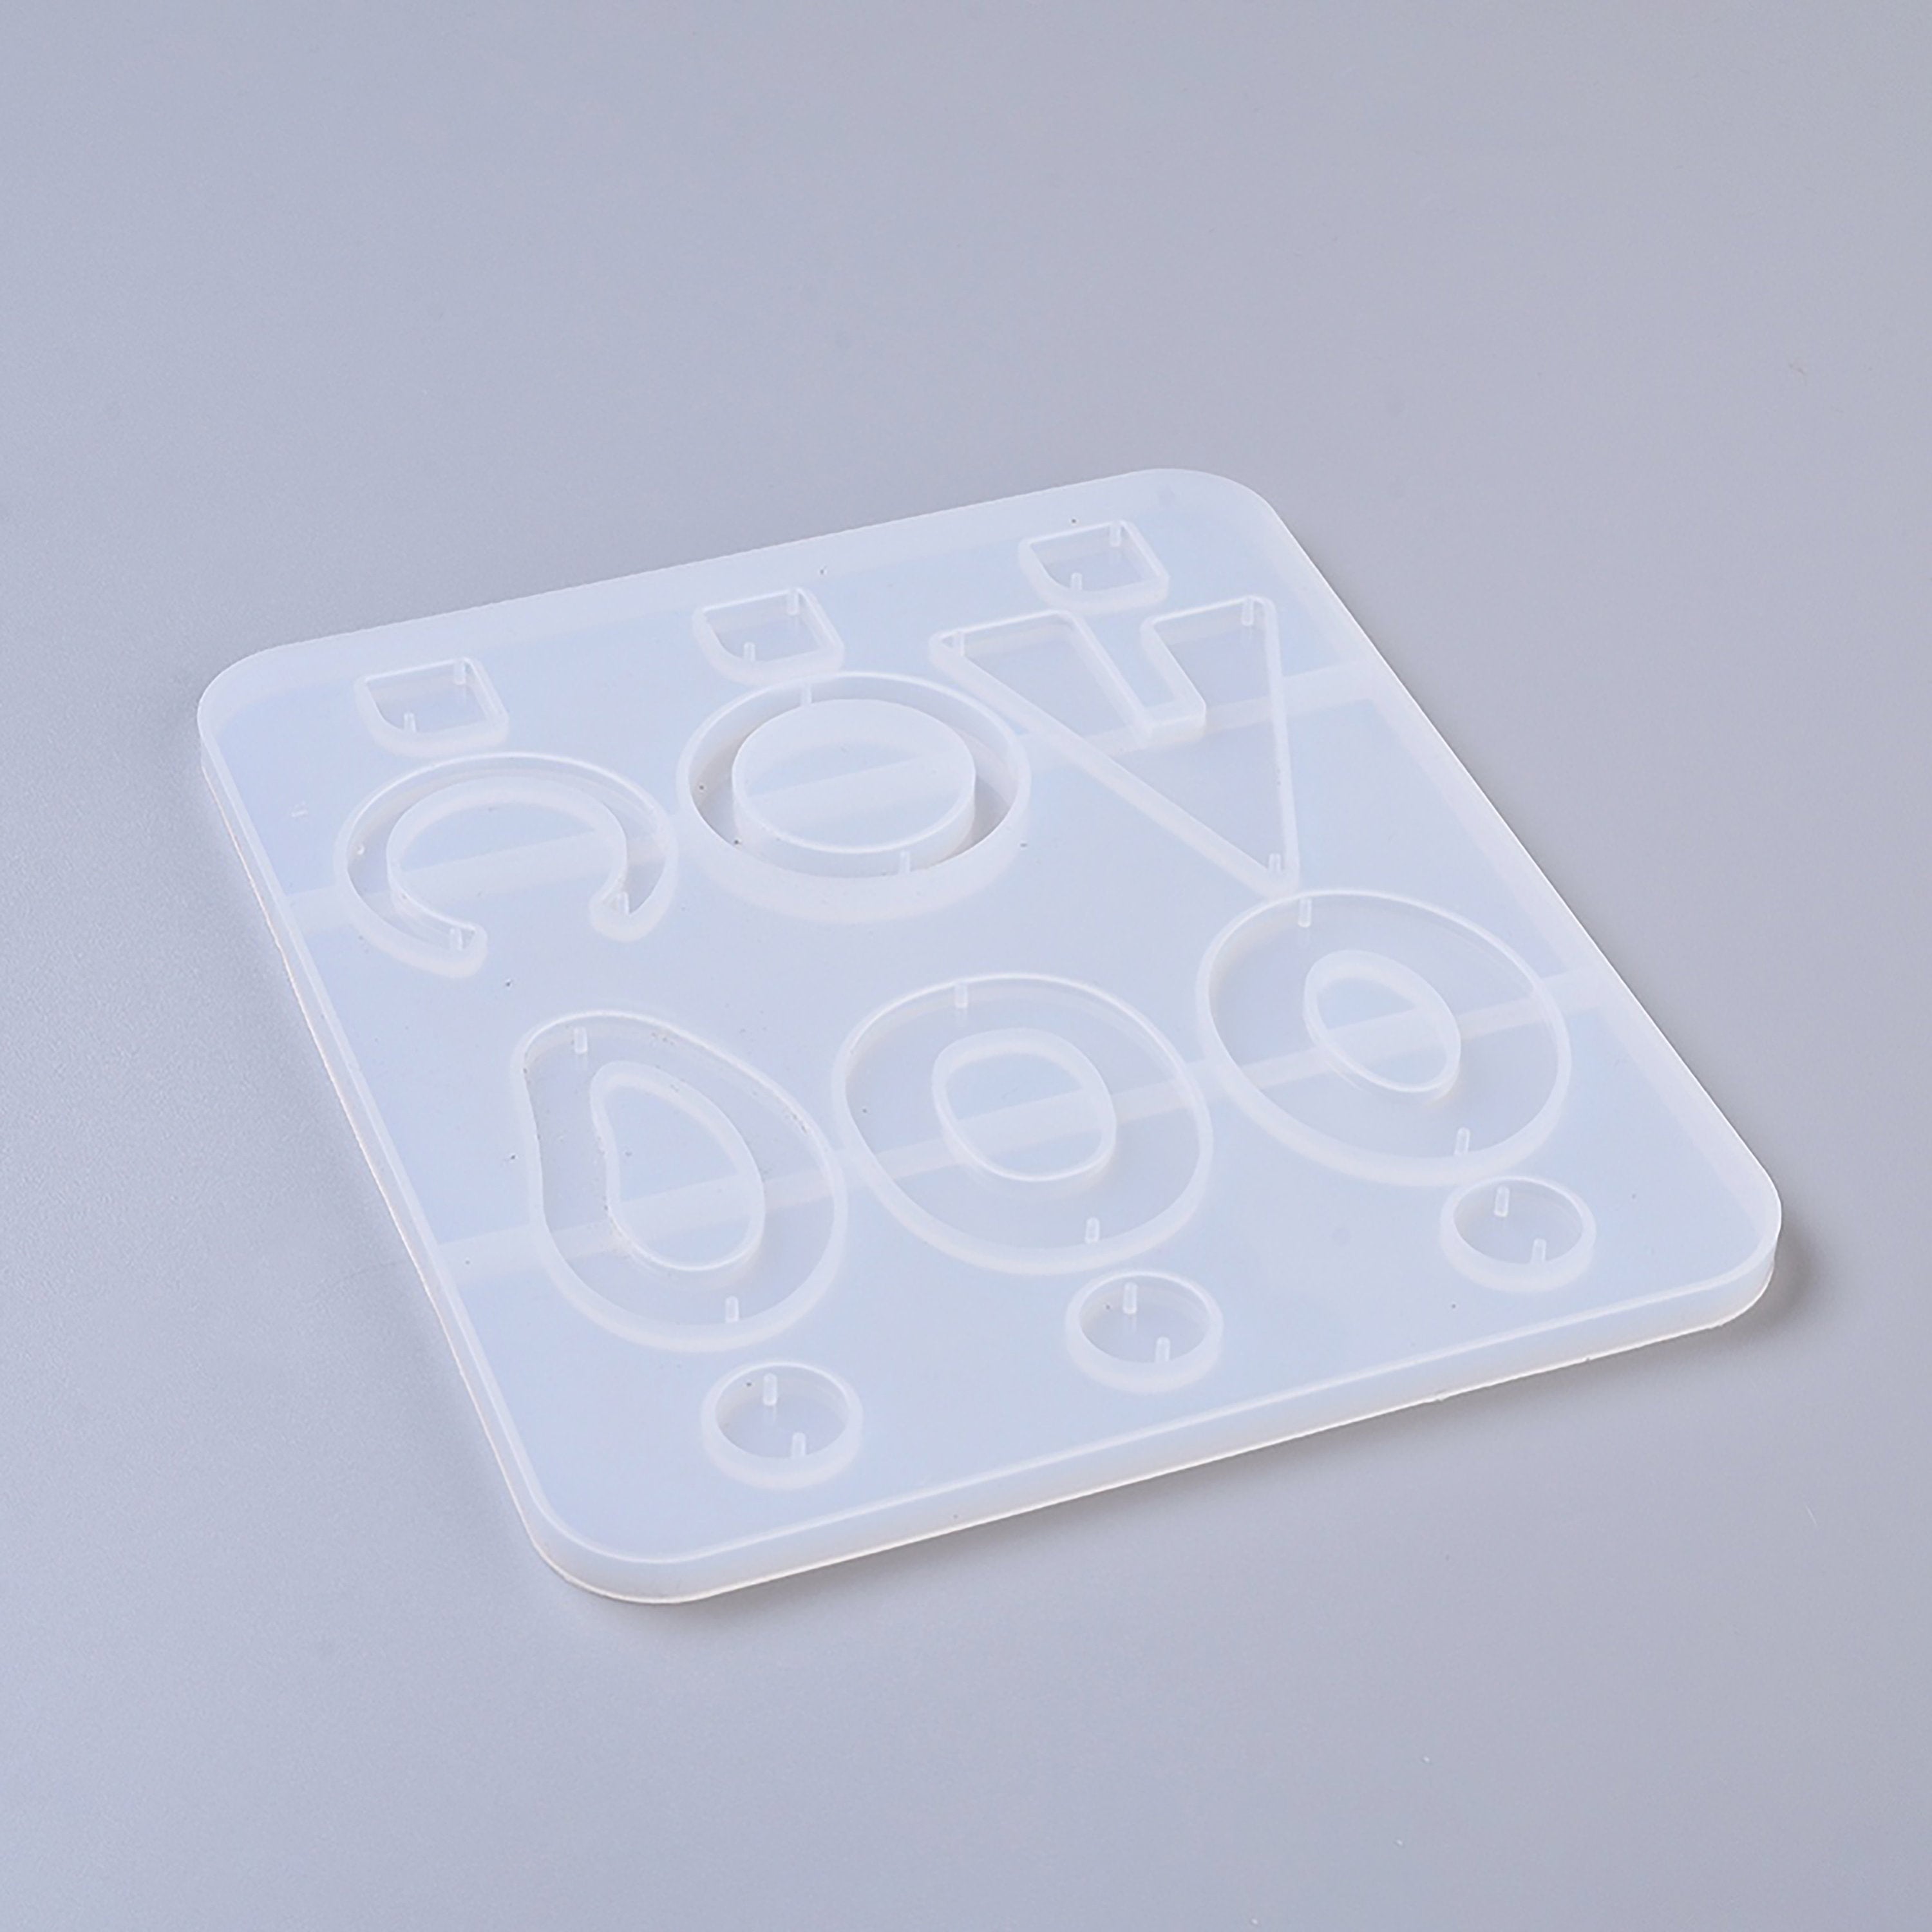 1pc, 173x151x7mm, Silicone Moulds, Resin Casting Moulds, For UV Resin, Epoxy Resin Jewelry Making, Mixed Shapes in Clear